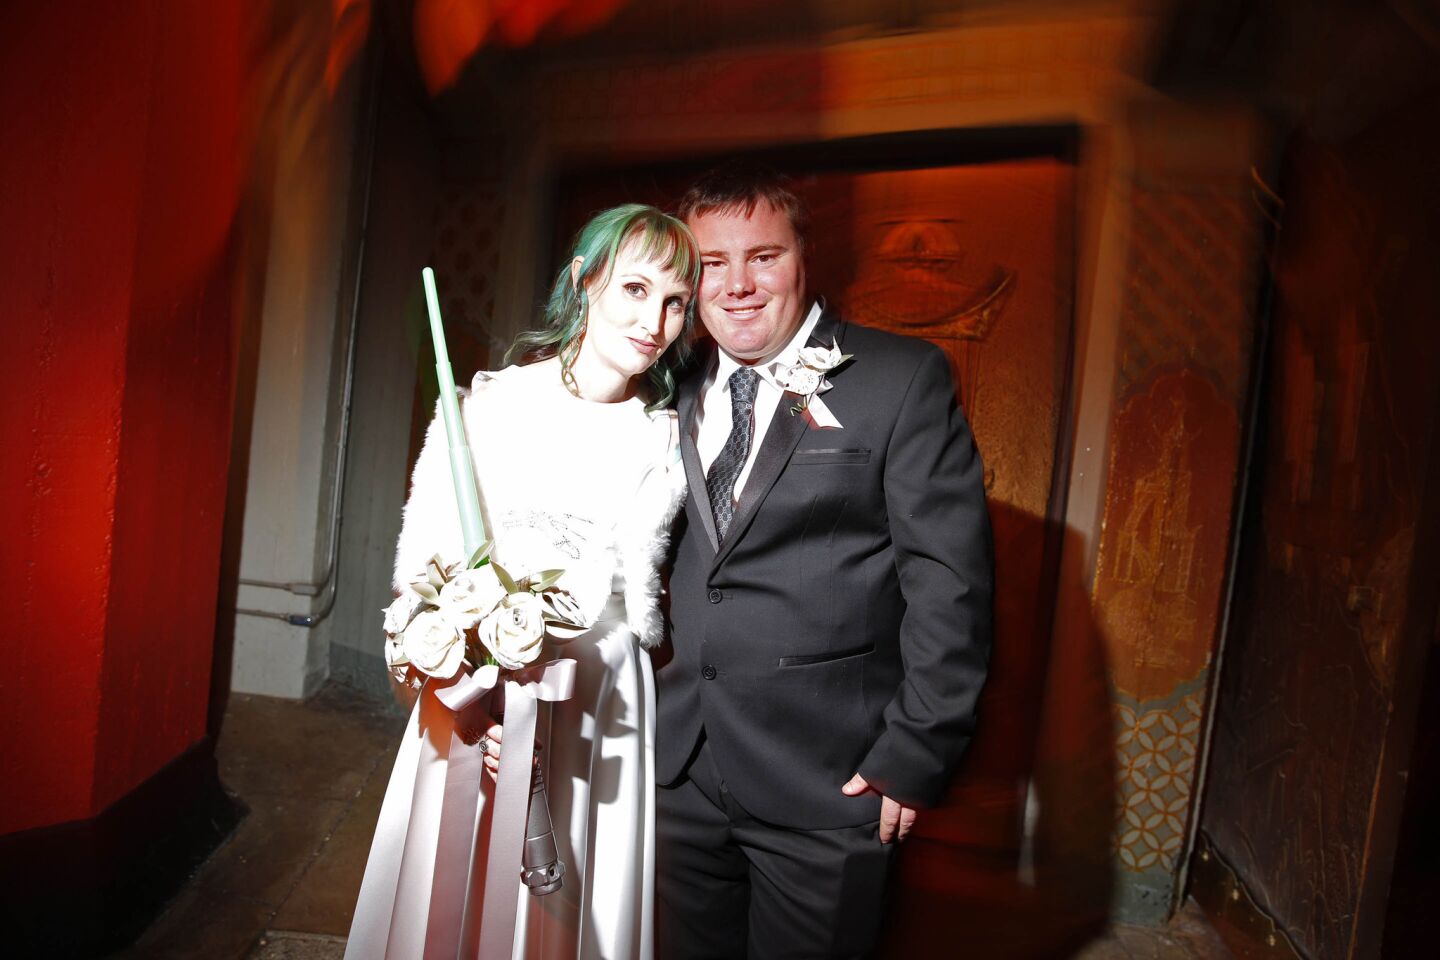 Caroline Ritter and Andrew Porters, both of Singleton, Australia, got married in front of the theater.